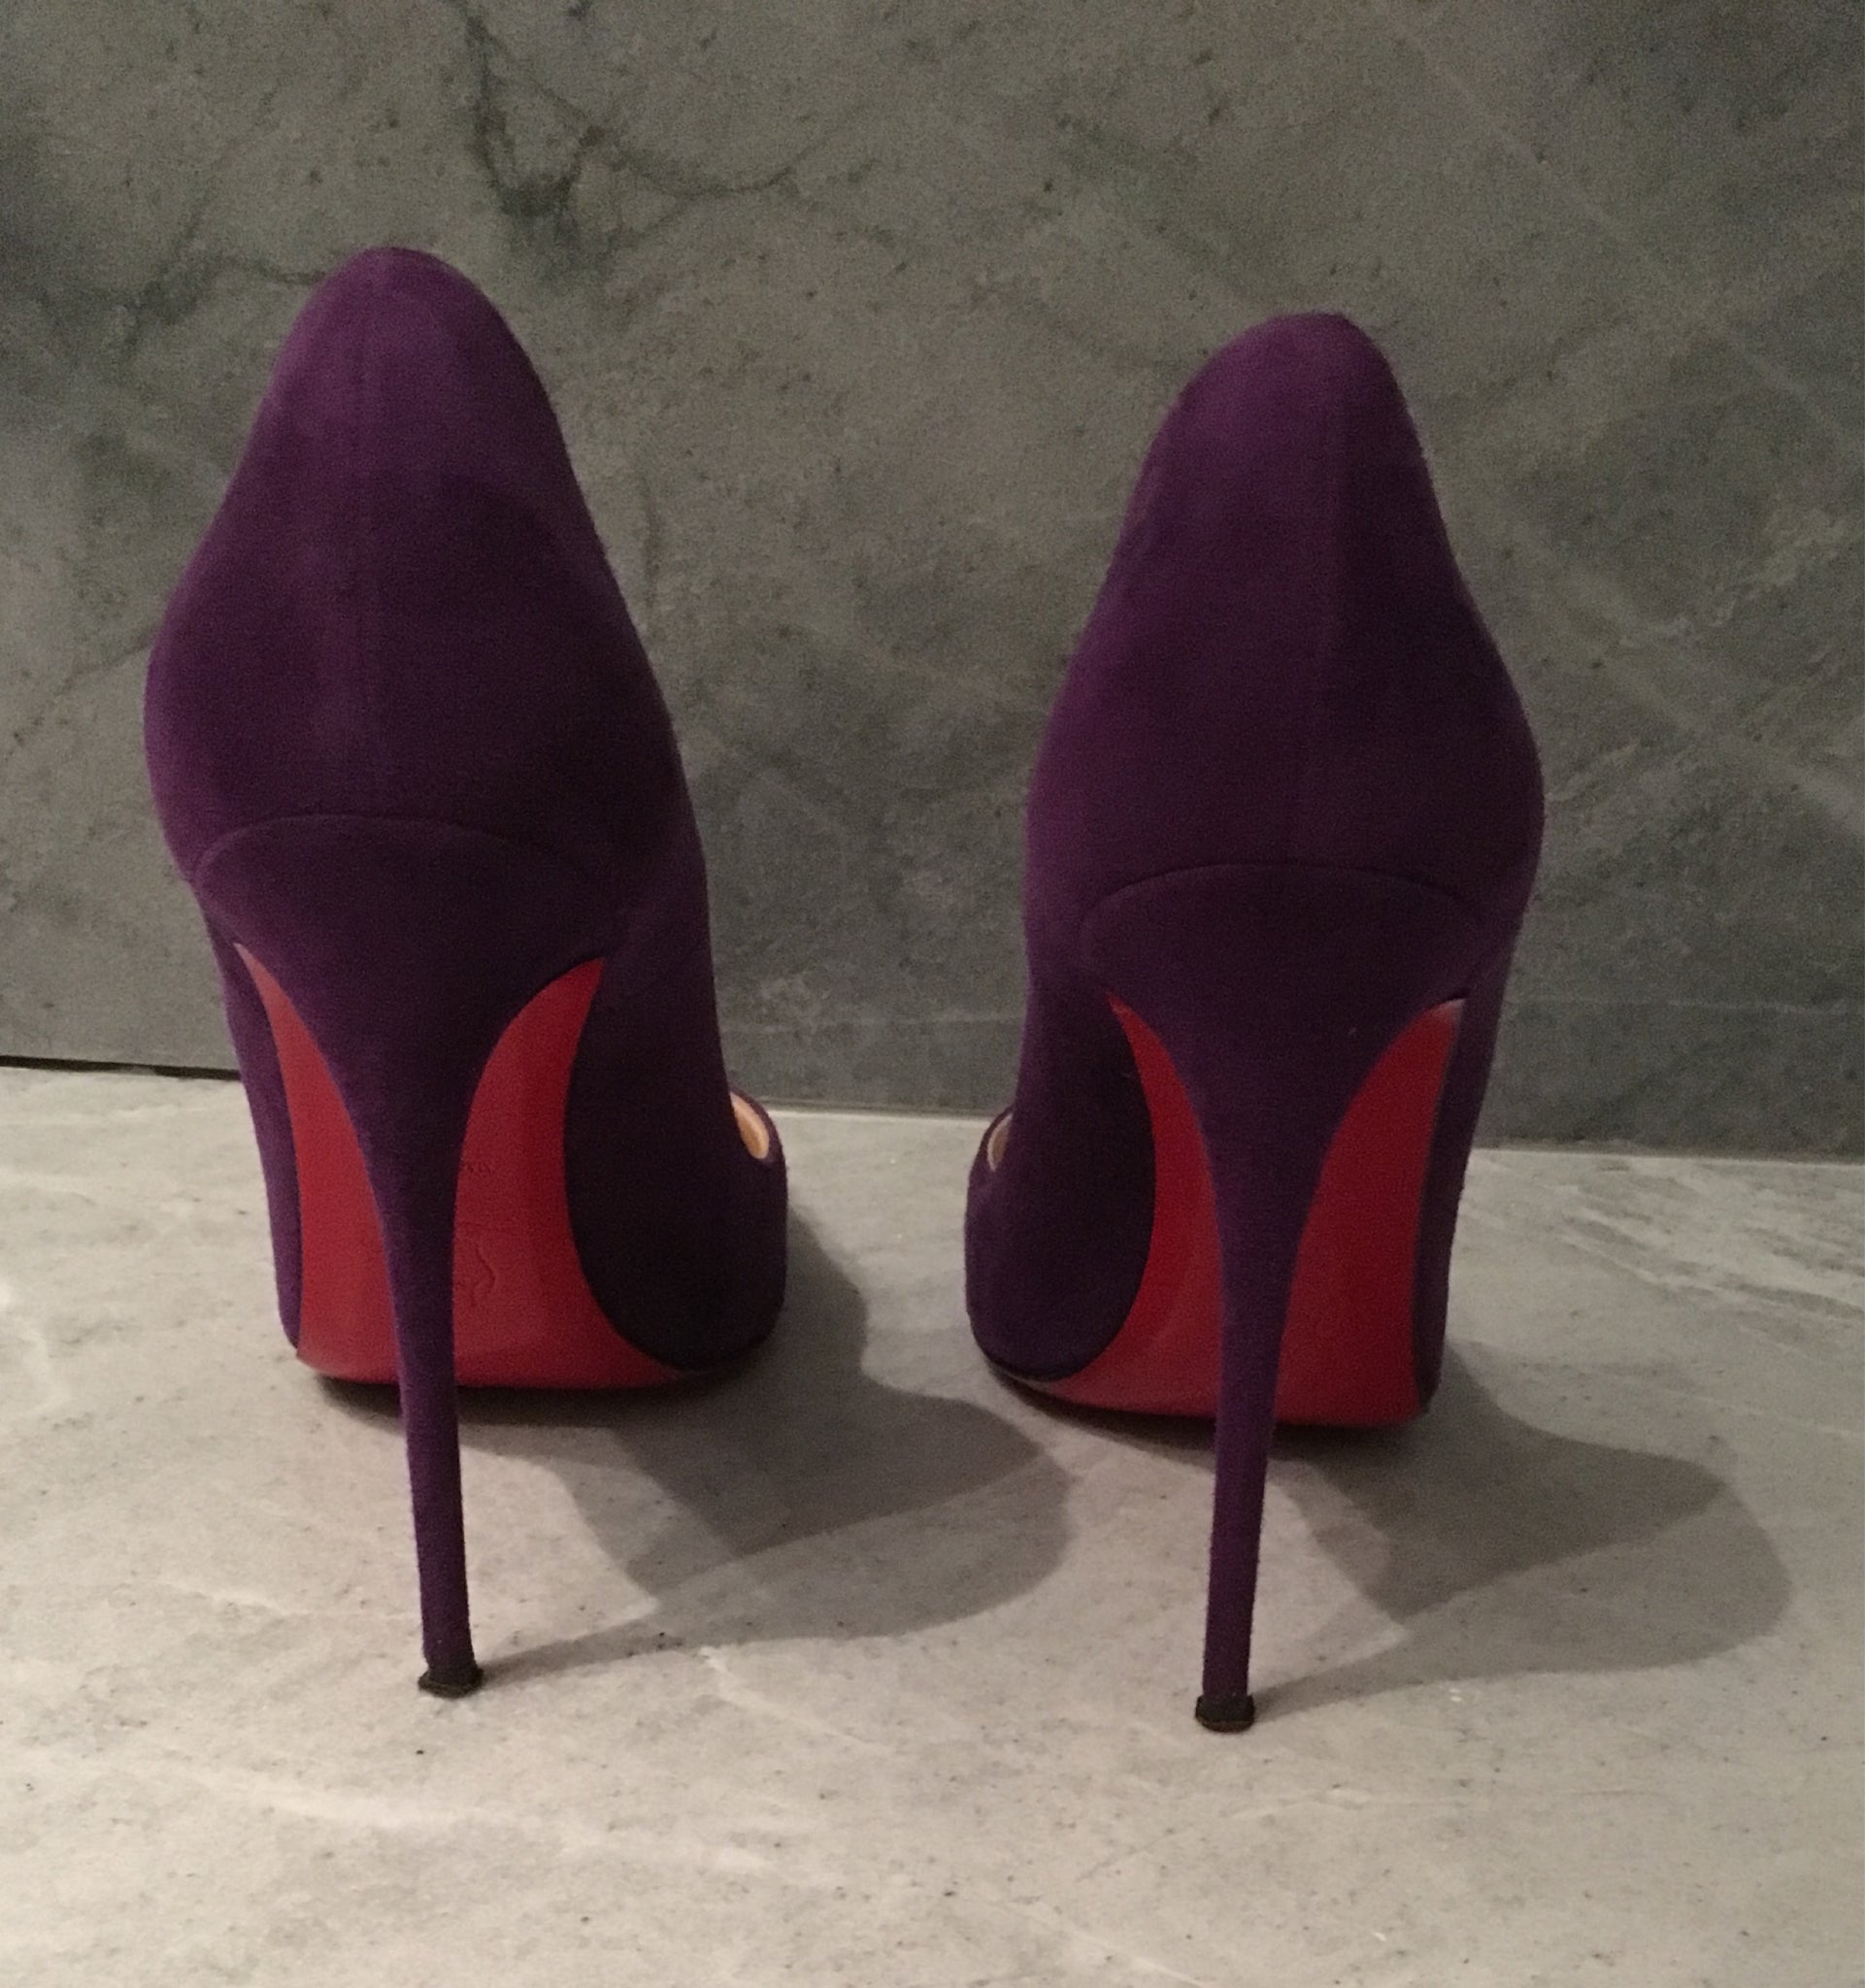 Reed Fashion Blog: CHRISTIAN LOUBOUTIN SO KATE VIOLET SUEDE